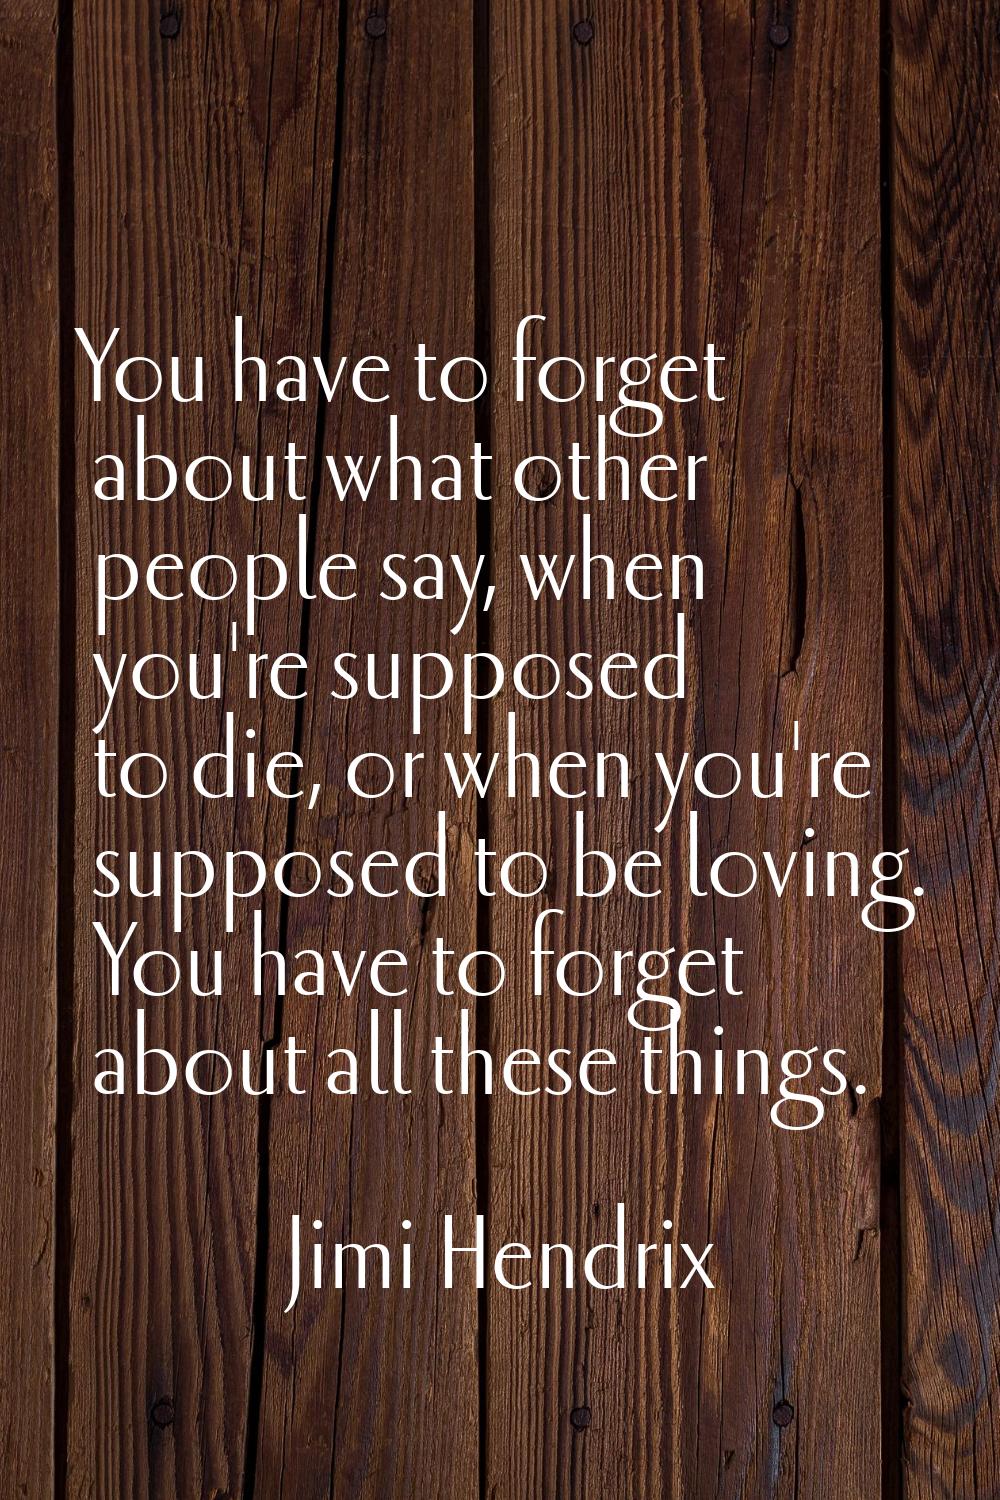 You have to forget about what other people say, when you're supposed to die, or when you're suppose